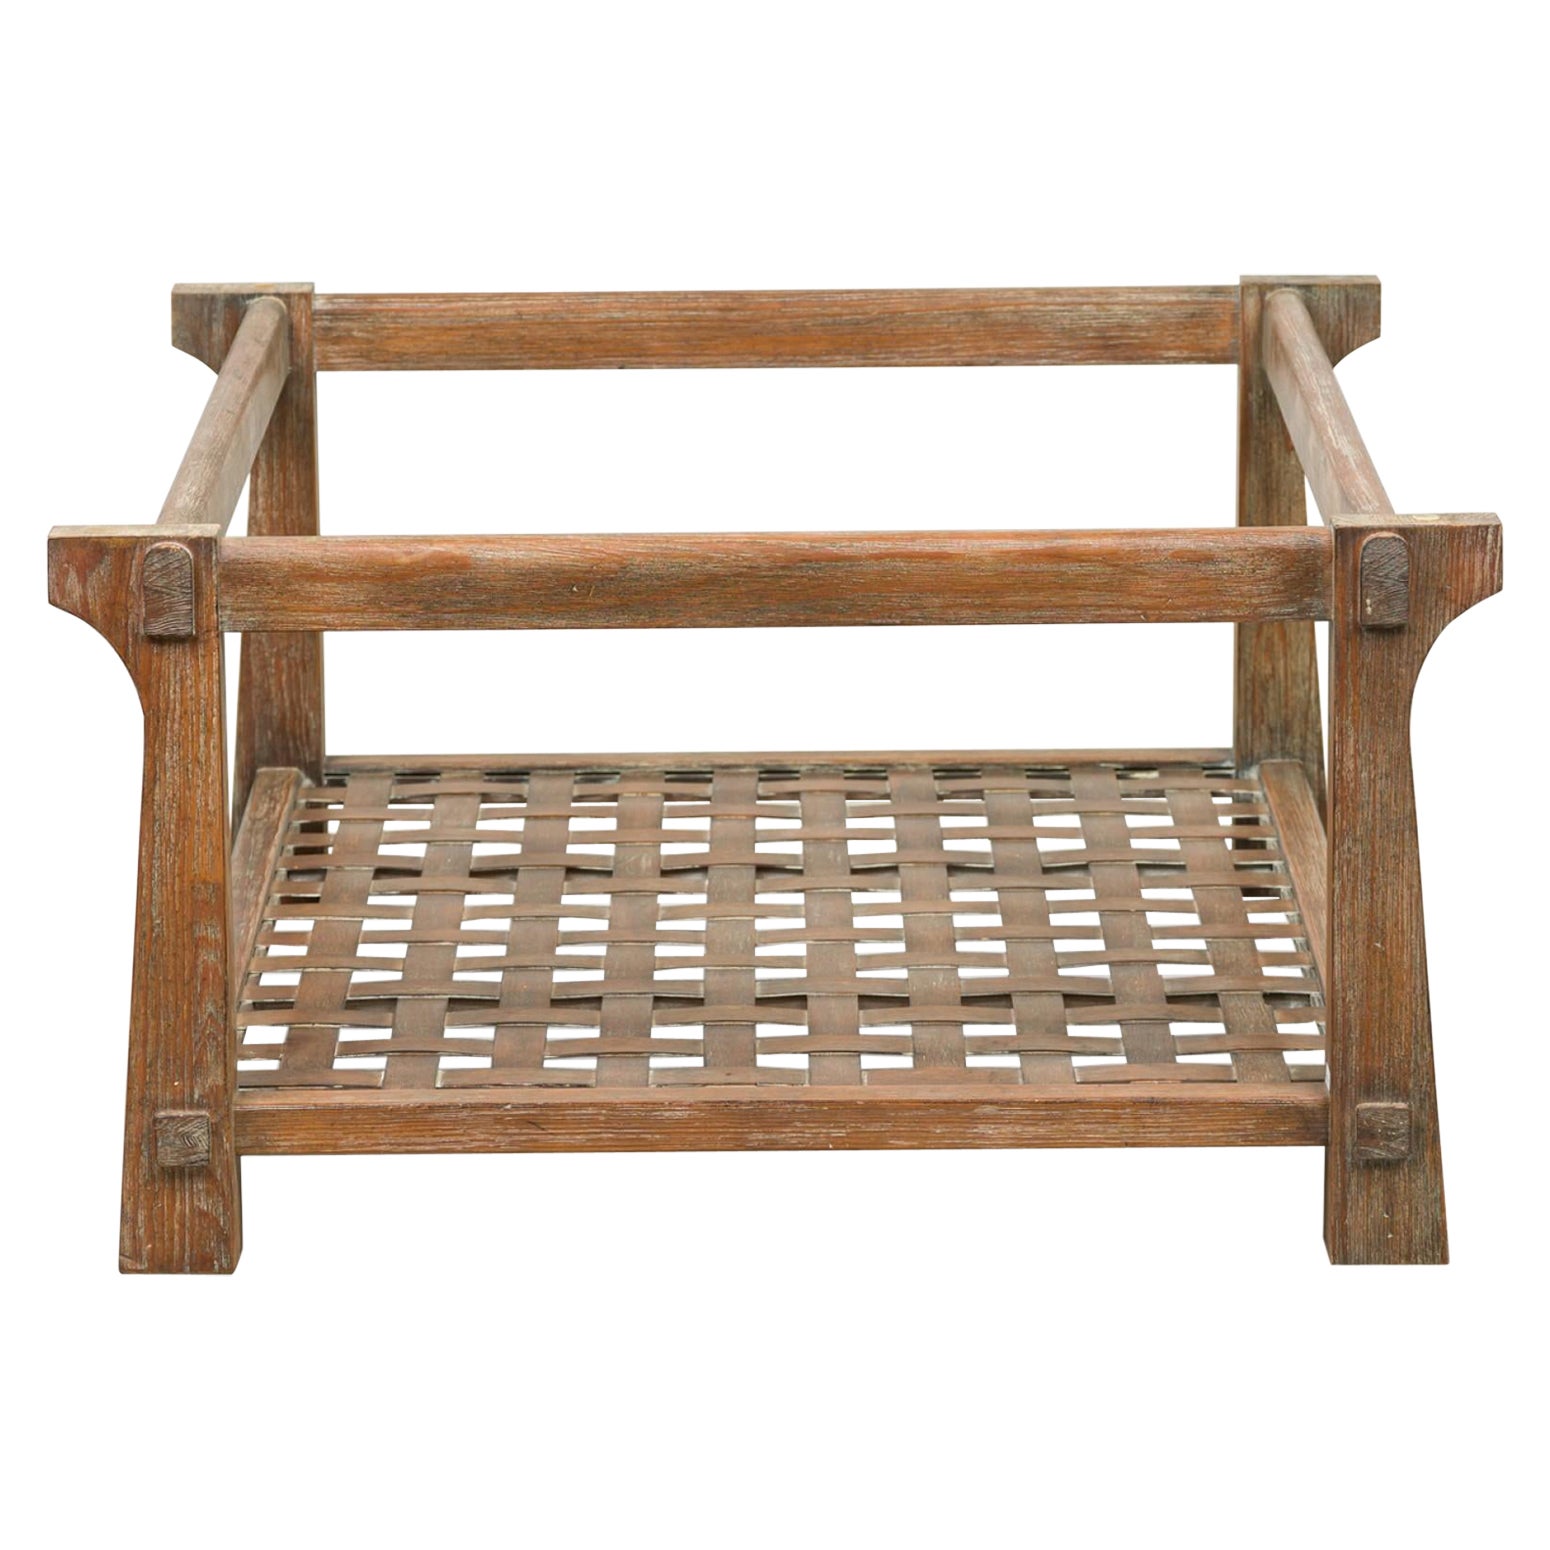 Jamie Herzlinger American Cerused Wood and Caned Low Coffee Table Frame